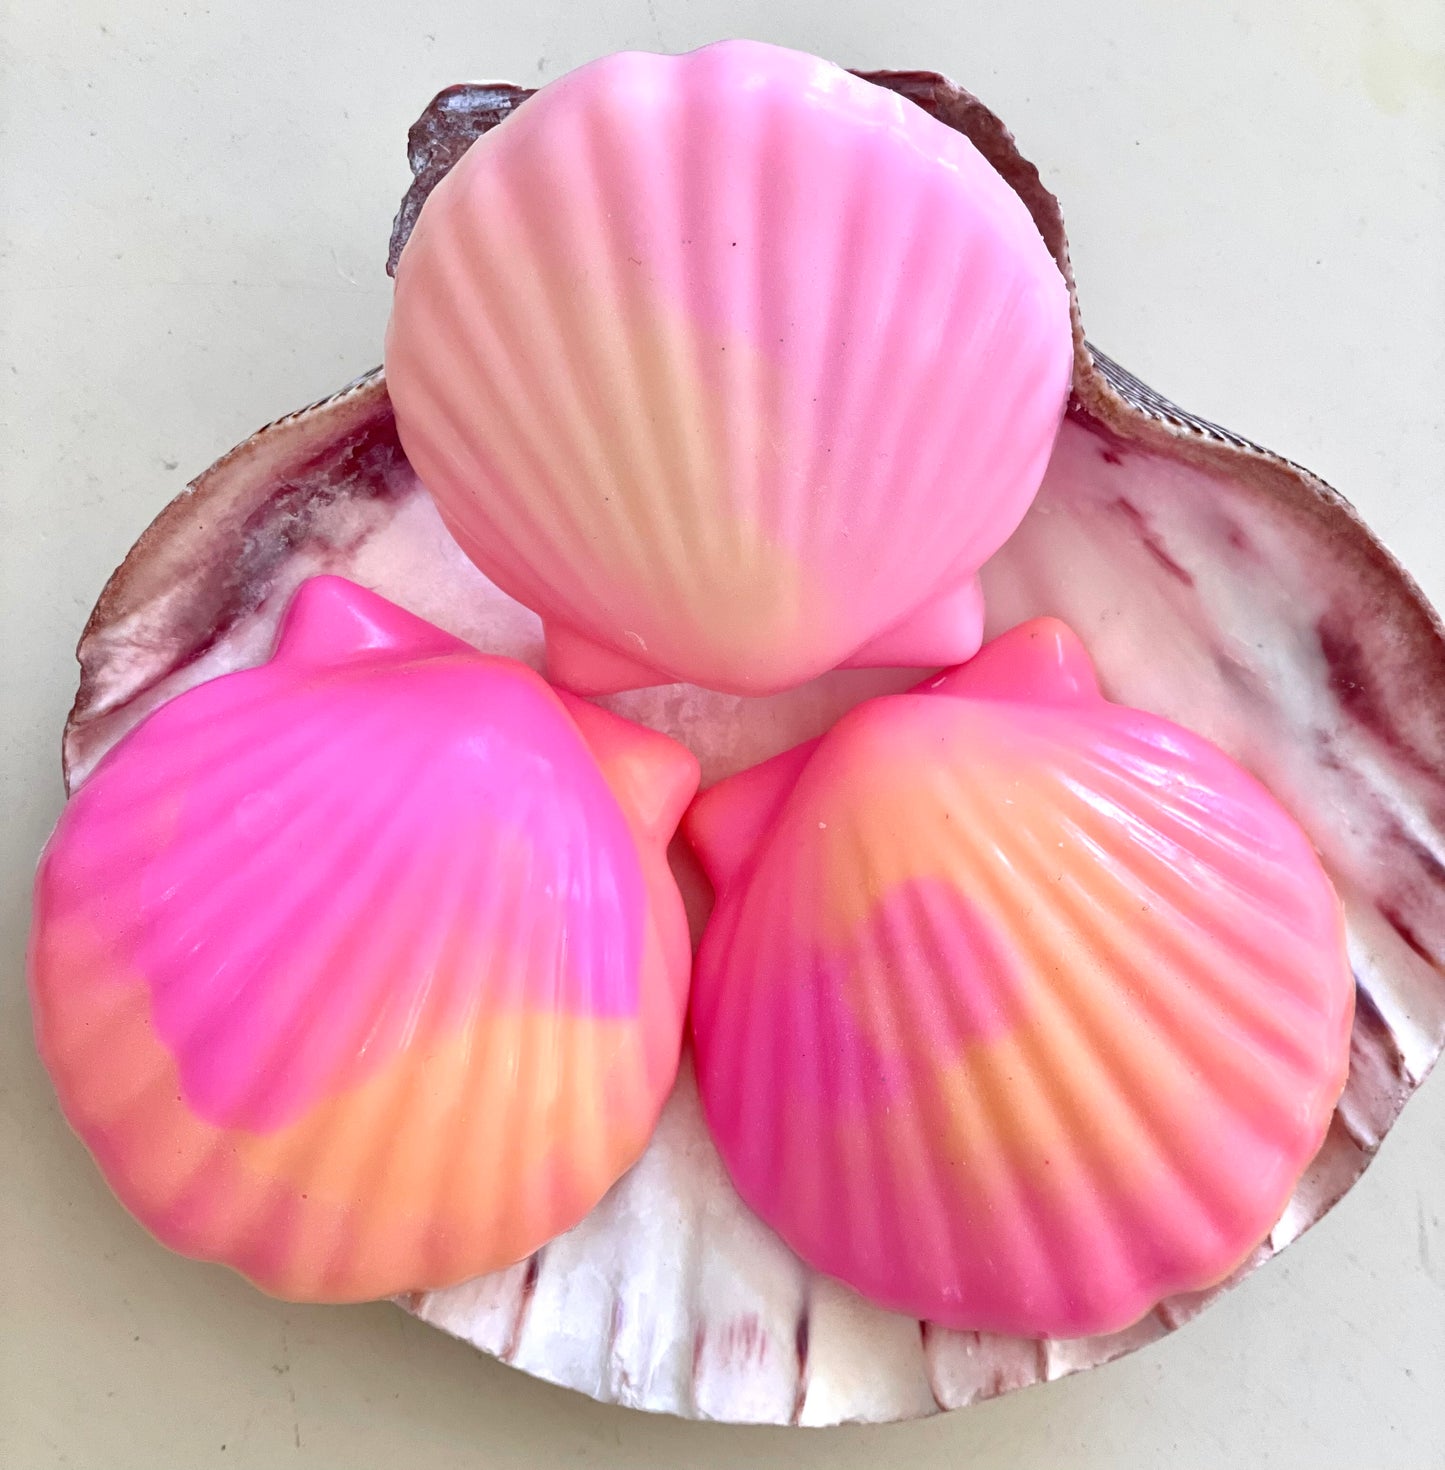 Beautiful sea shell body soaps in colorful hues of pink and orange.  Hand poured with shea butter and other essential oils. Scented with hibiscus essential oil.